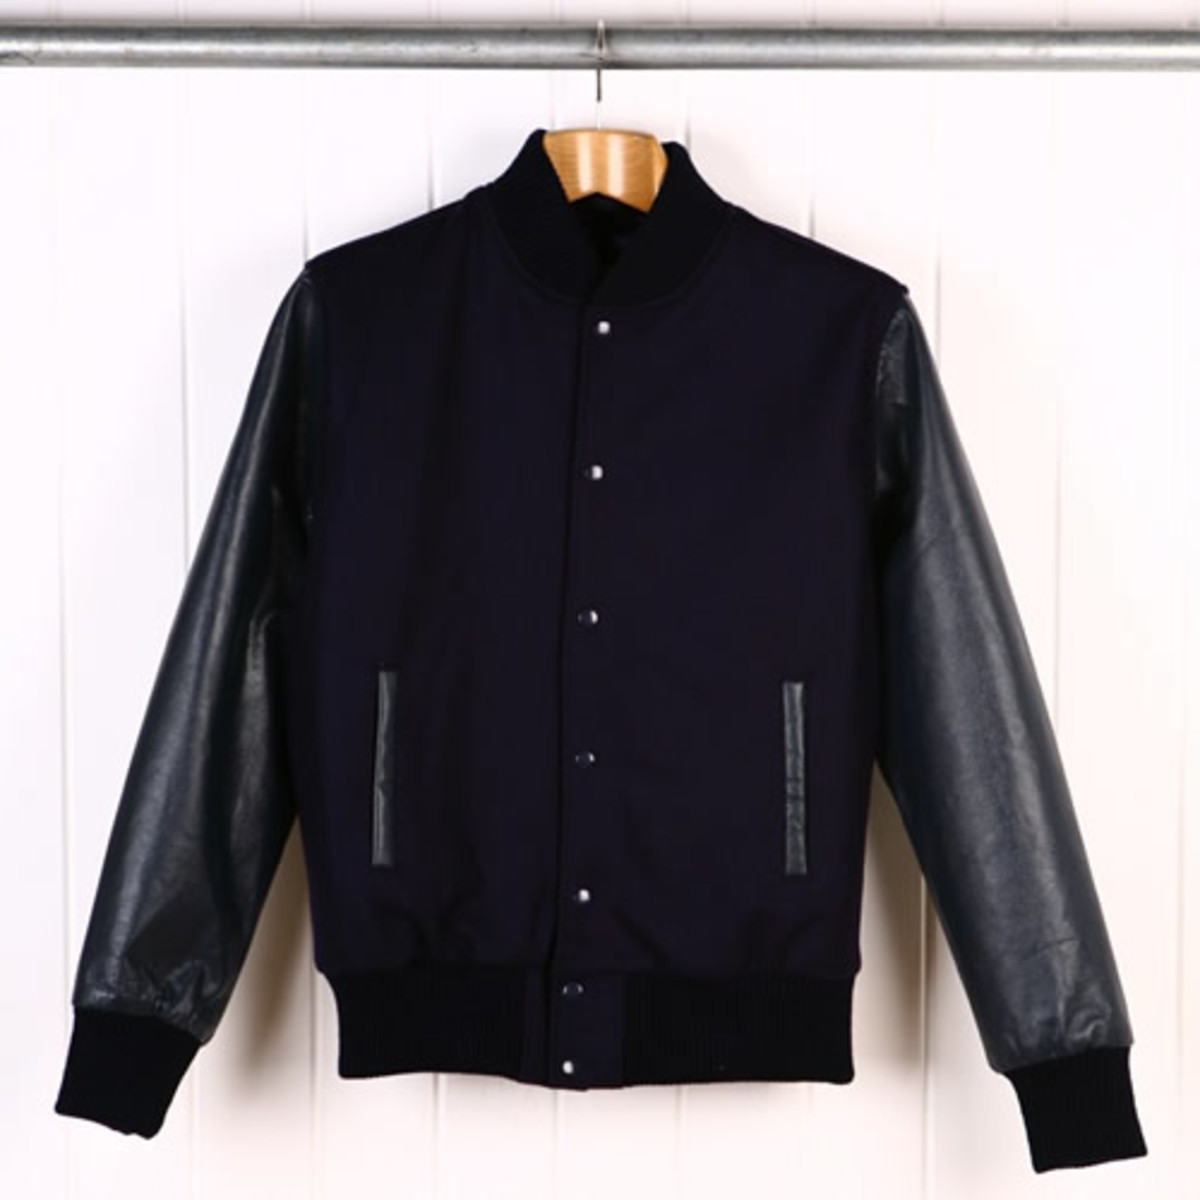 Heritage Research Varsity Jacket for Oi Polloi - Acquire